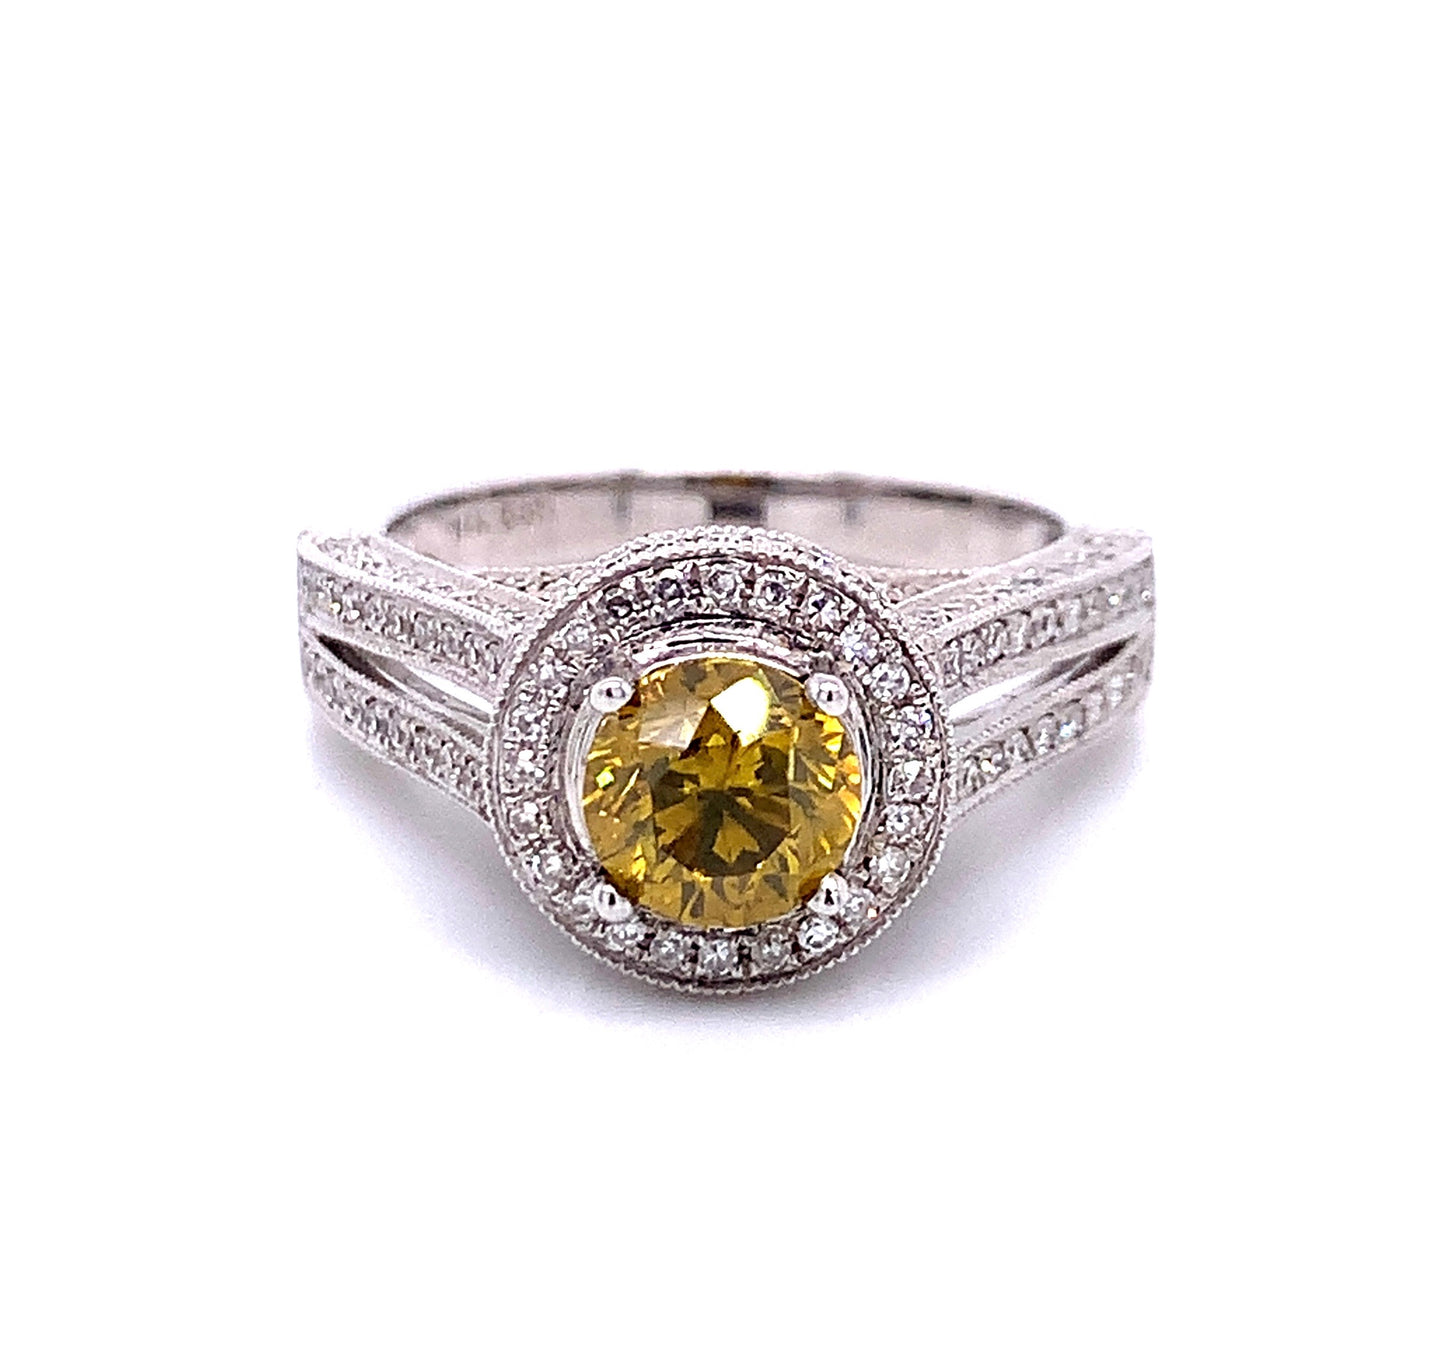 Fancy Yellow Diamond Engagement Ring in 14K White Gold